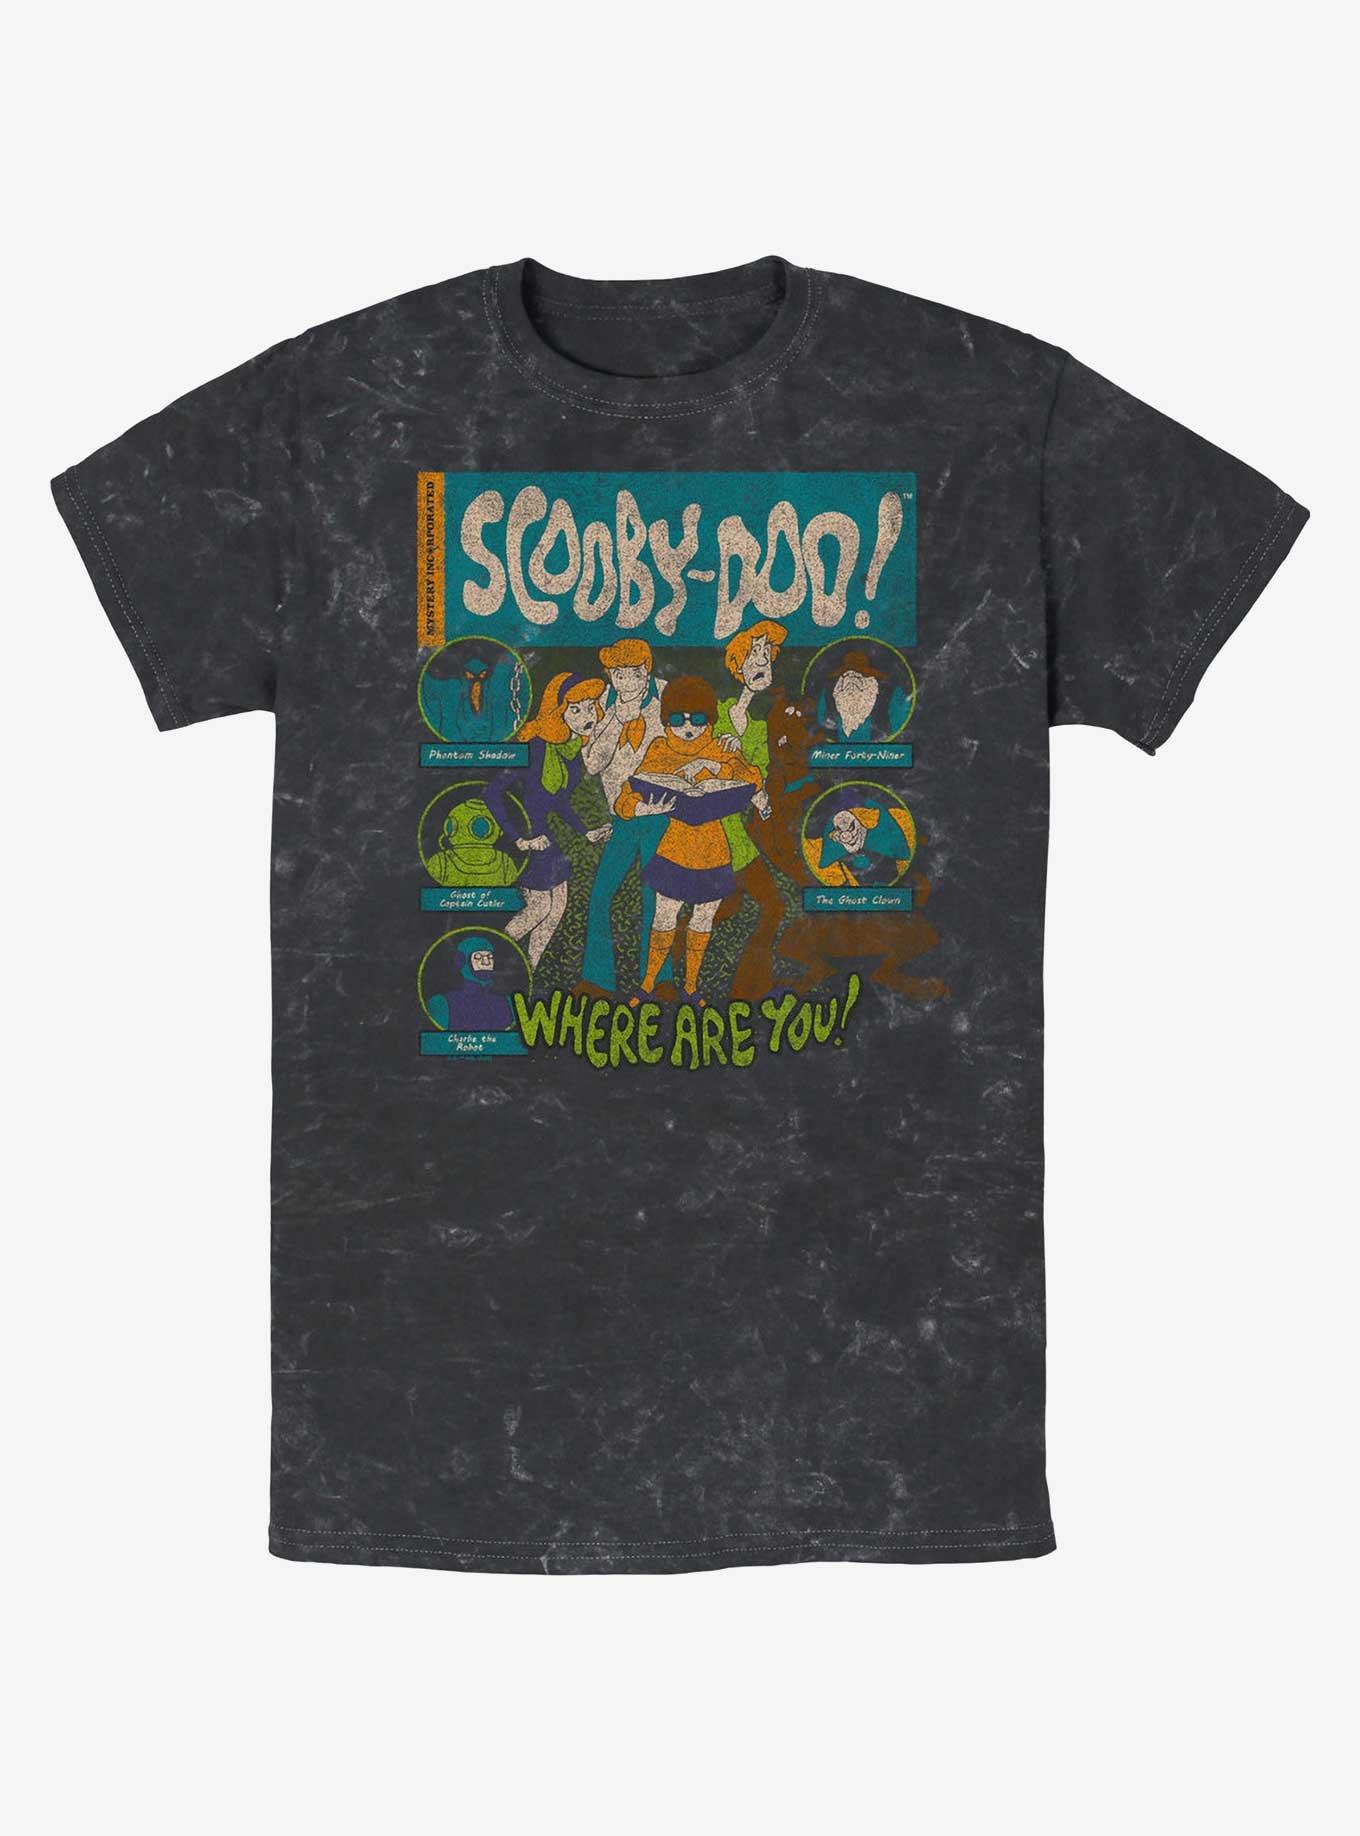 Scooby Doo Mystery Poster Mineral Wash T-Shirt